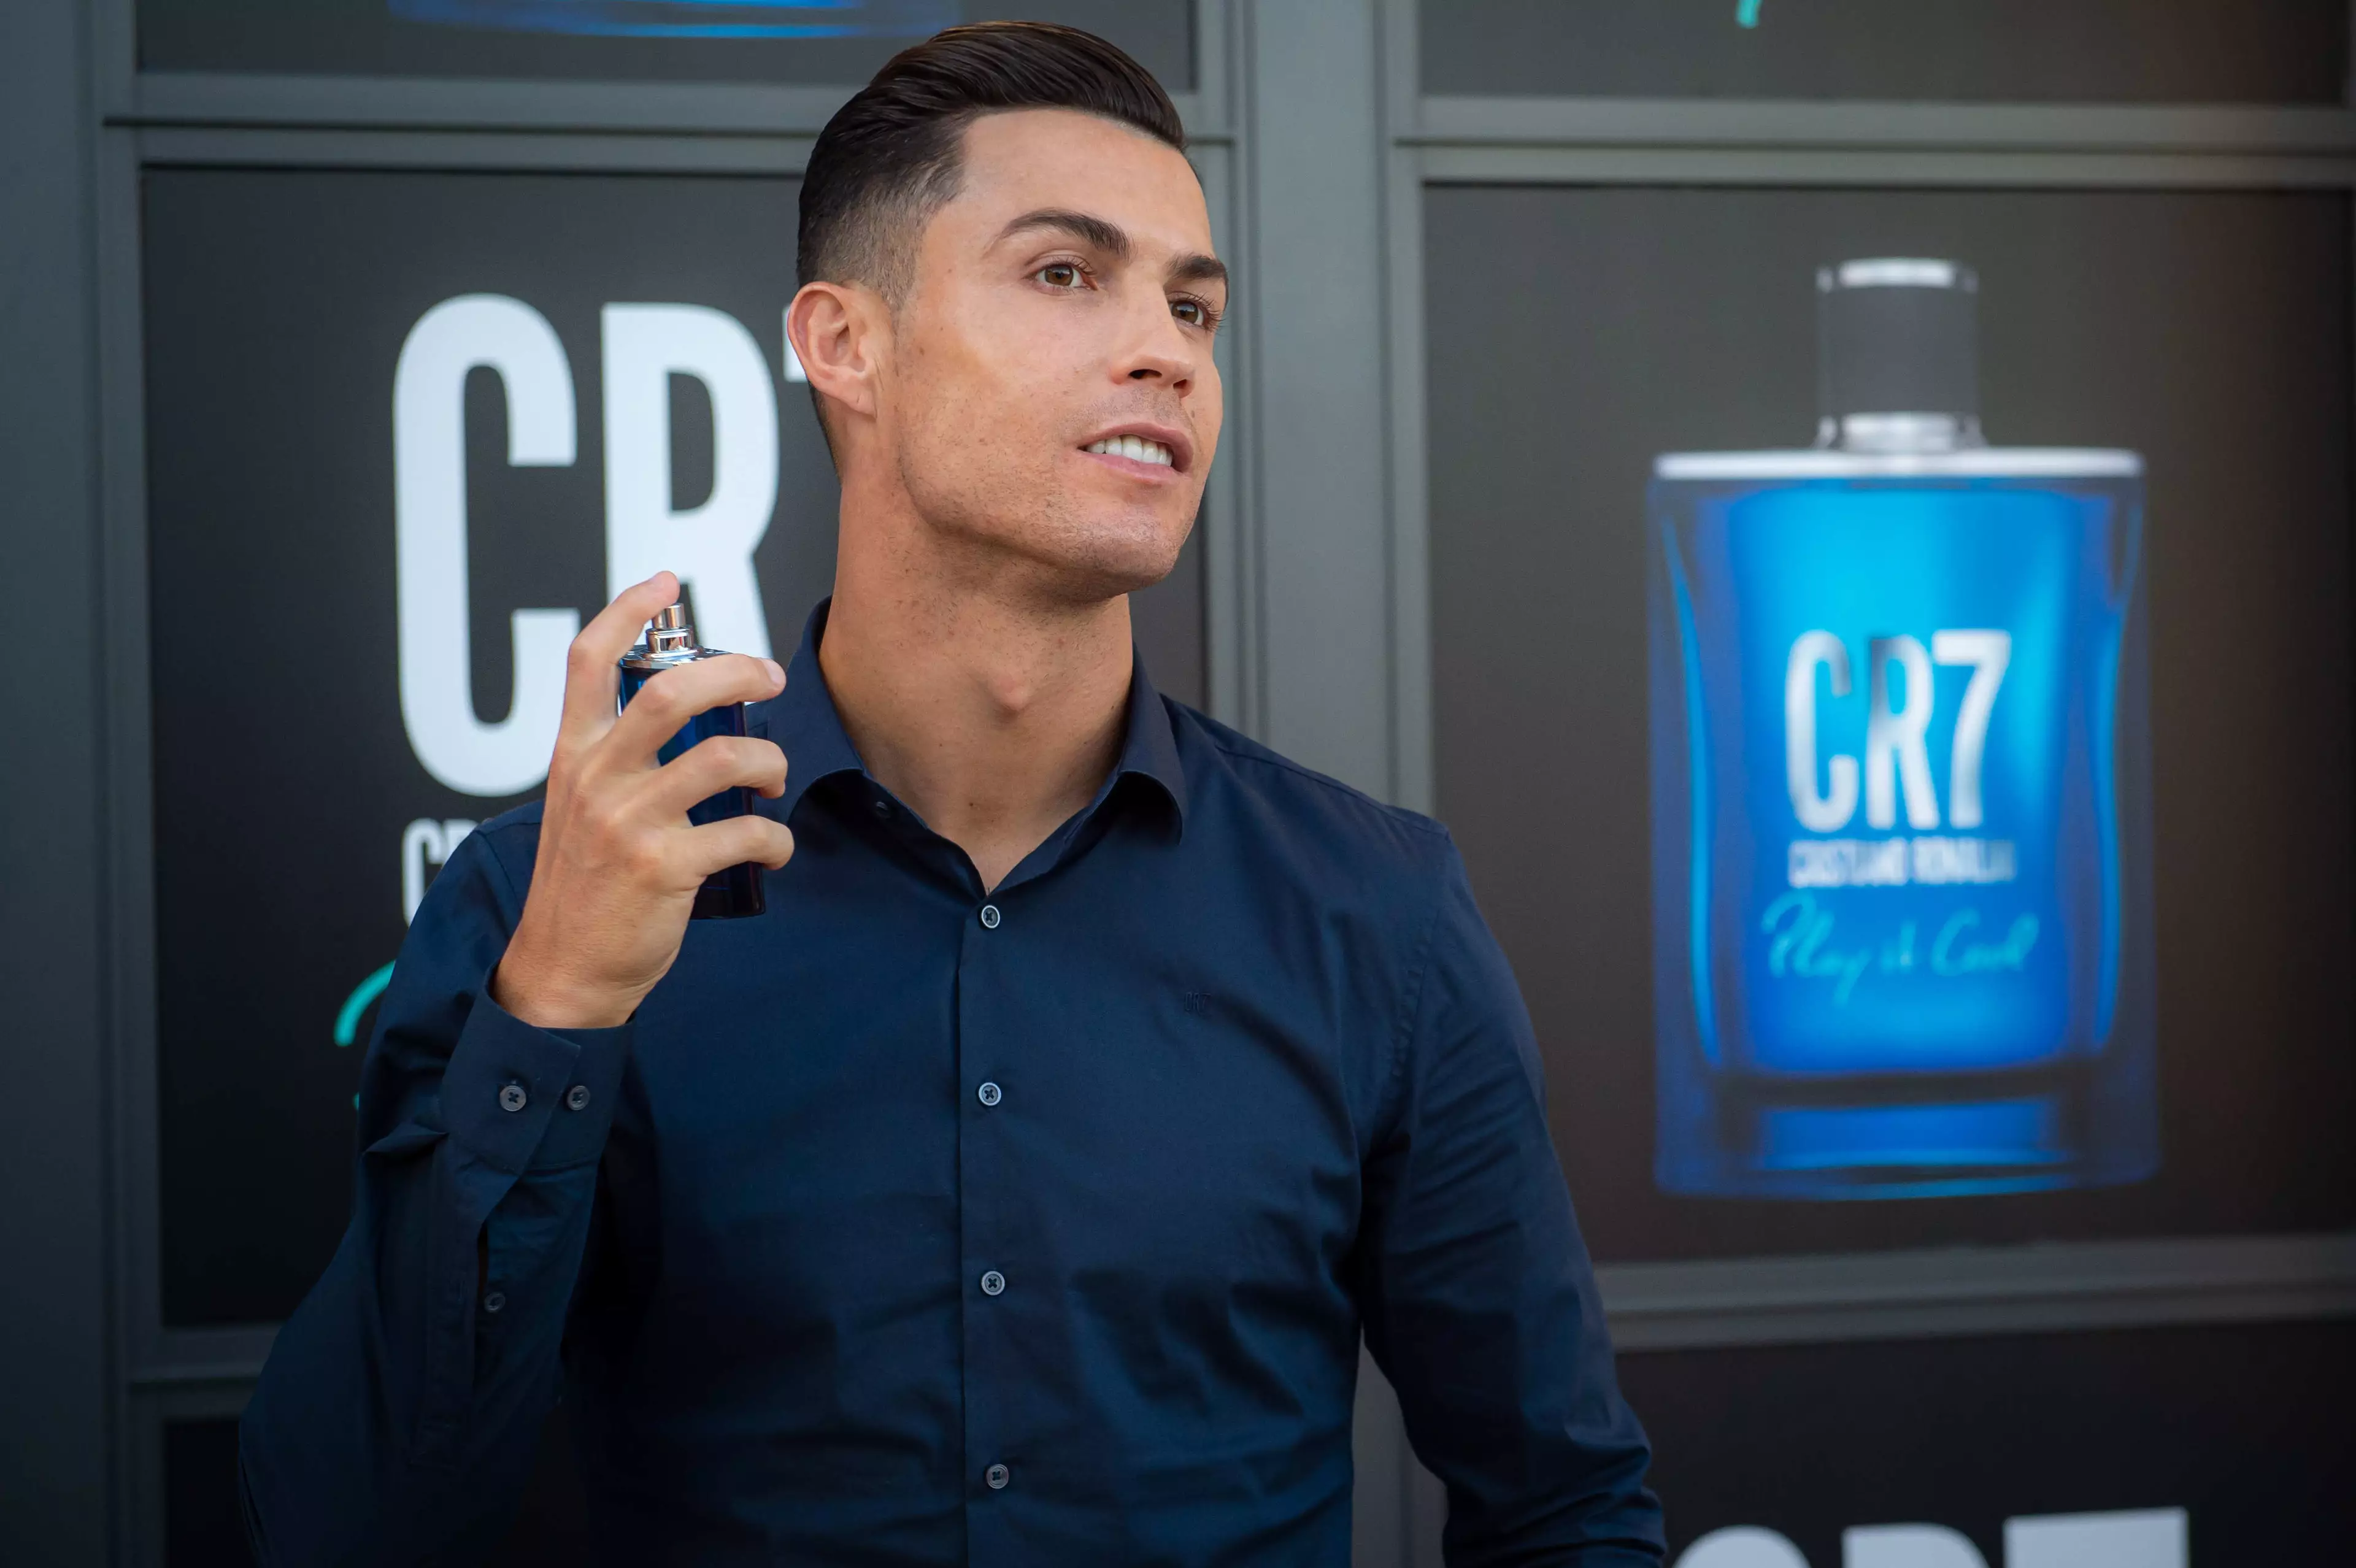 Cristiano Ronaldo spoke at the launch of his new fragrance 'Play It Cool'